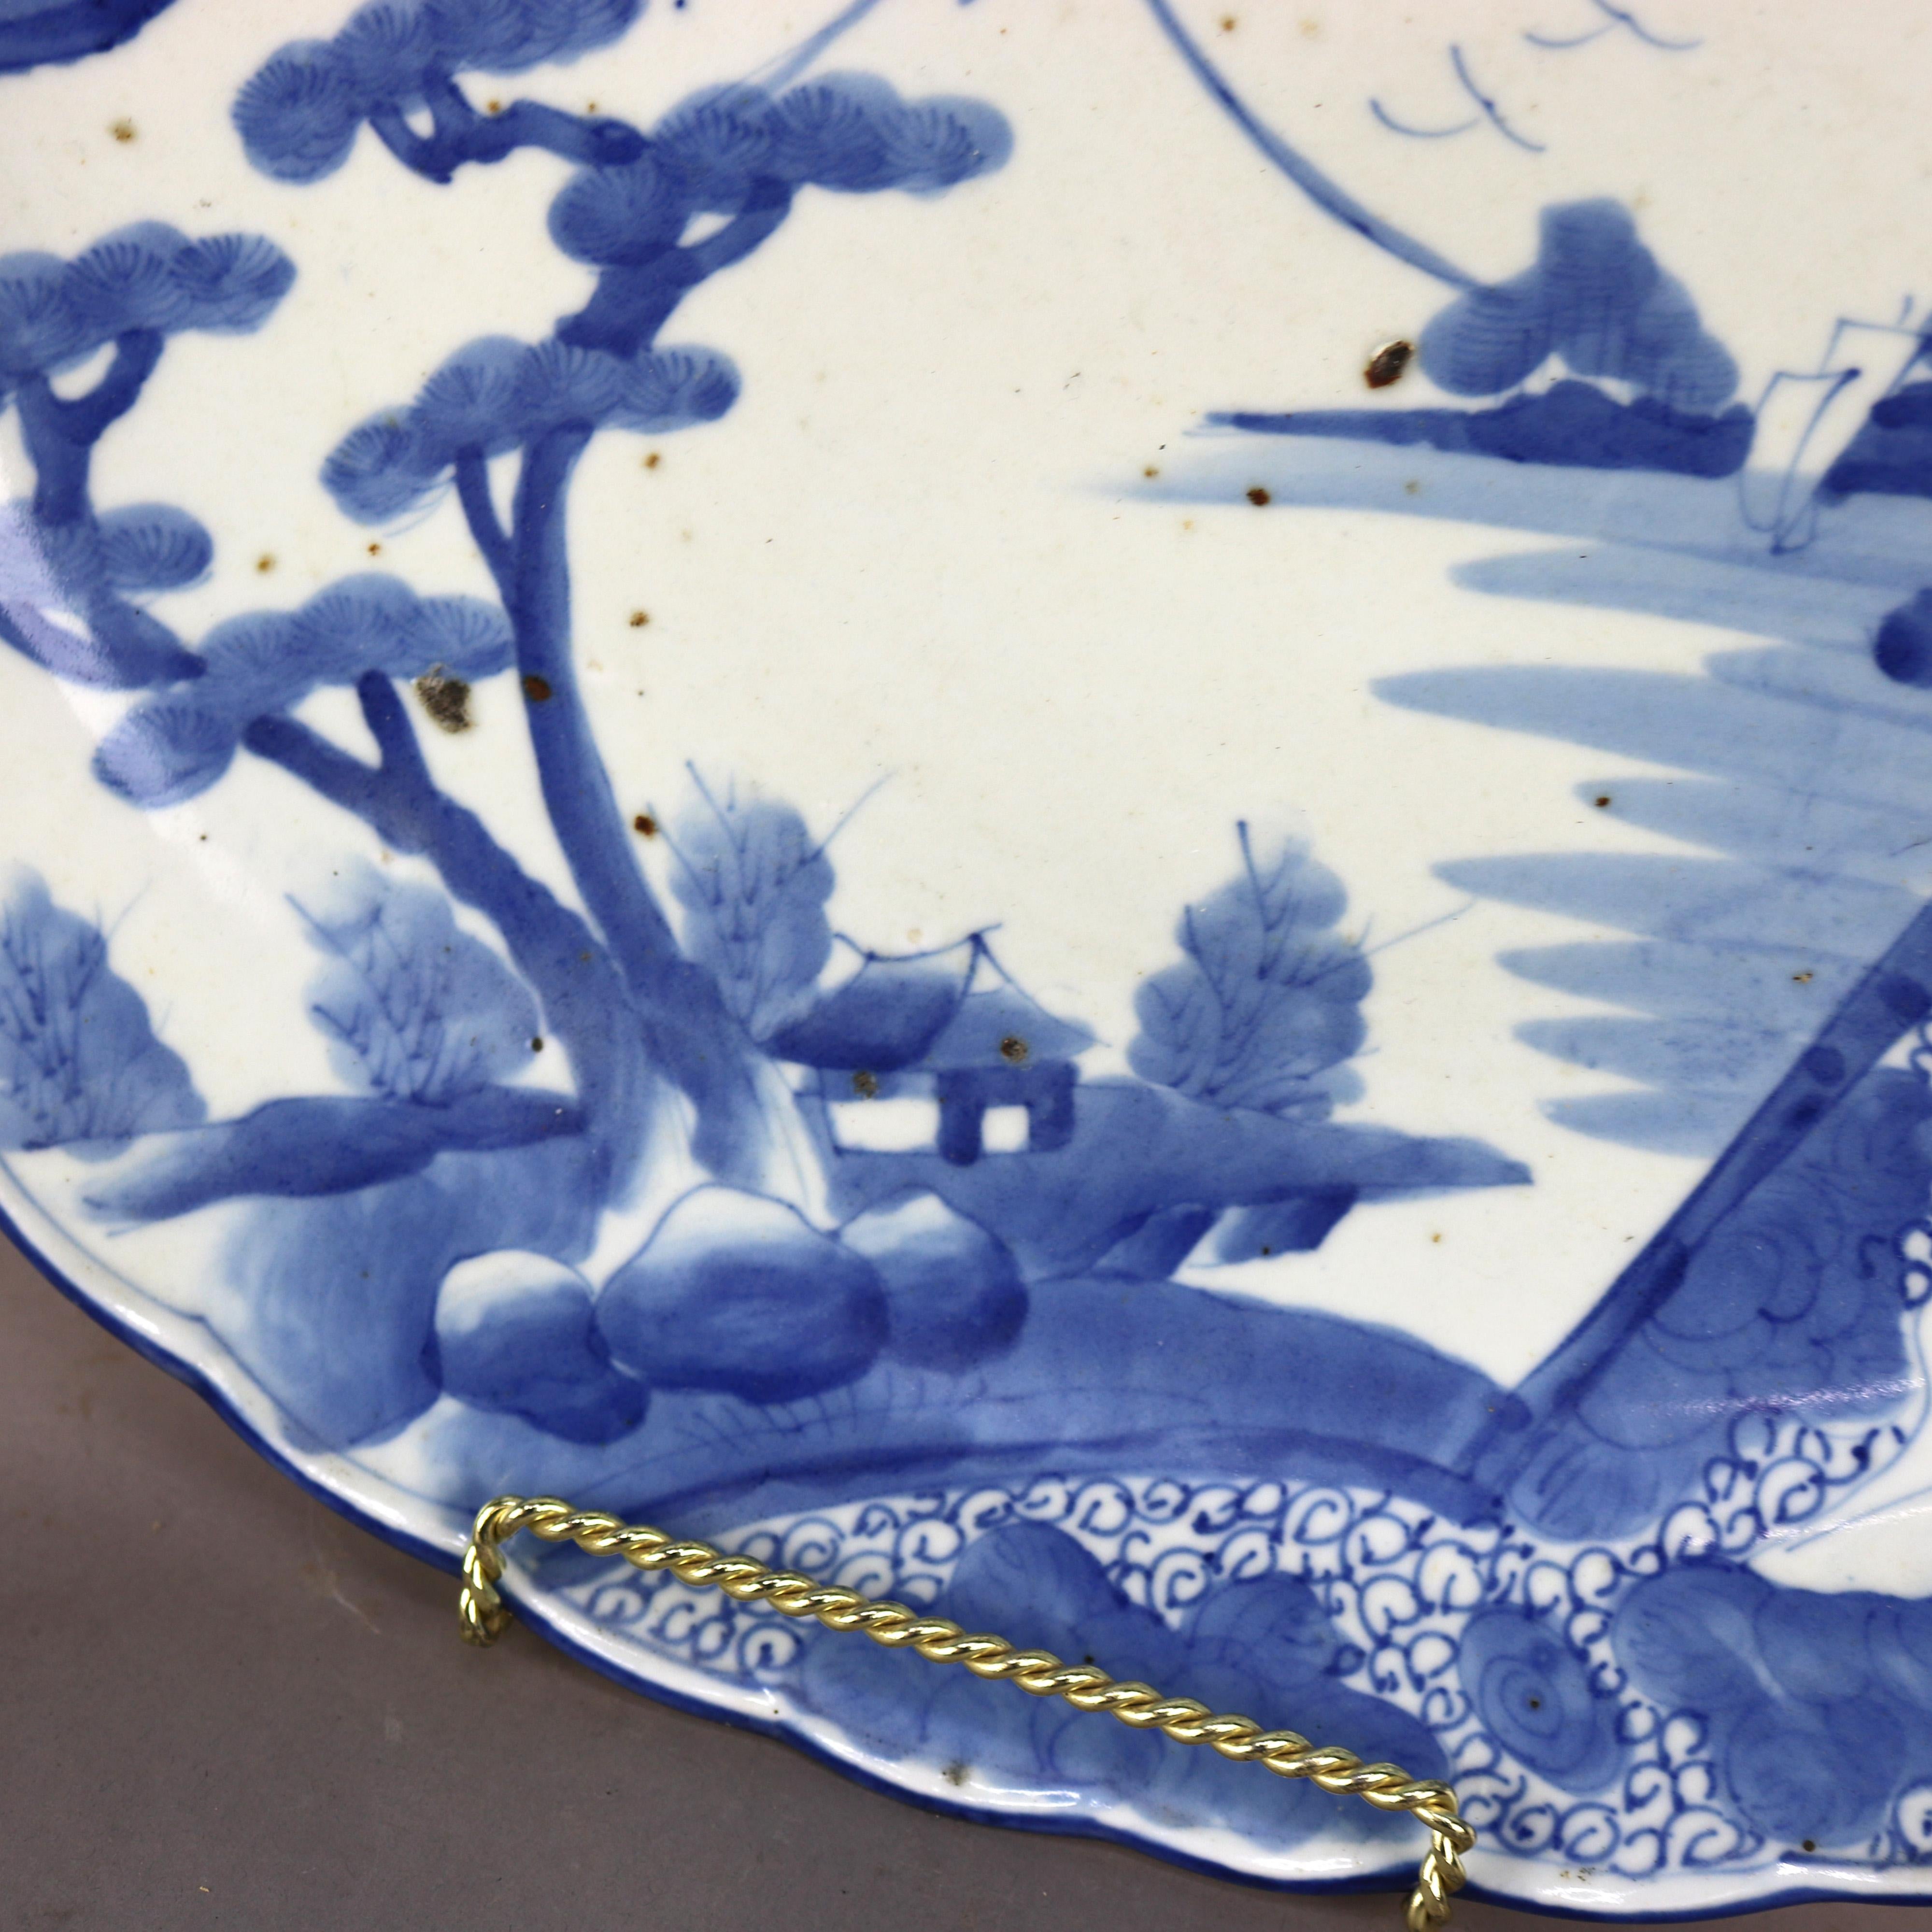 Glazed Antique Large Japanese Meiji Blue & White Decorated Charger Late 19th C